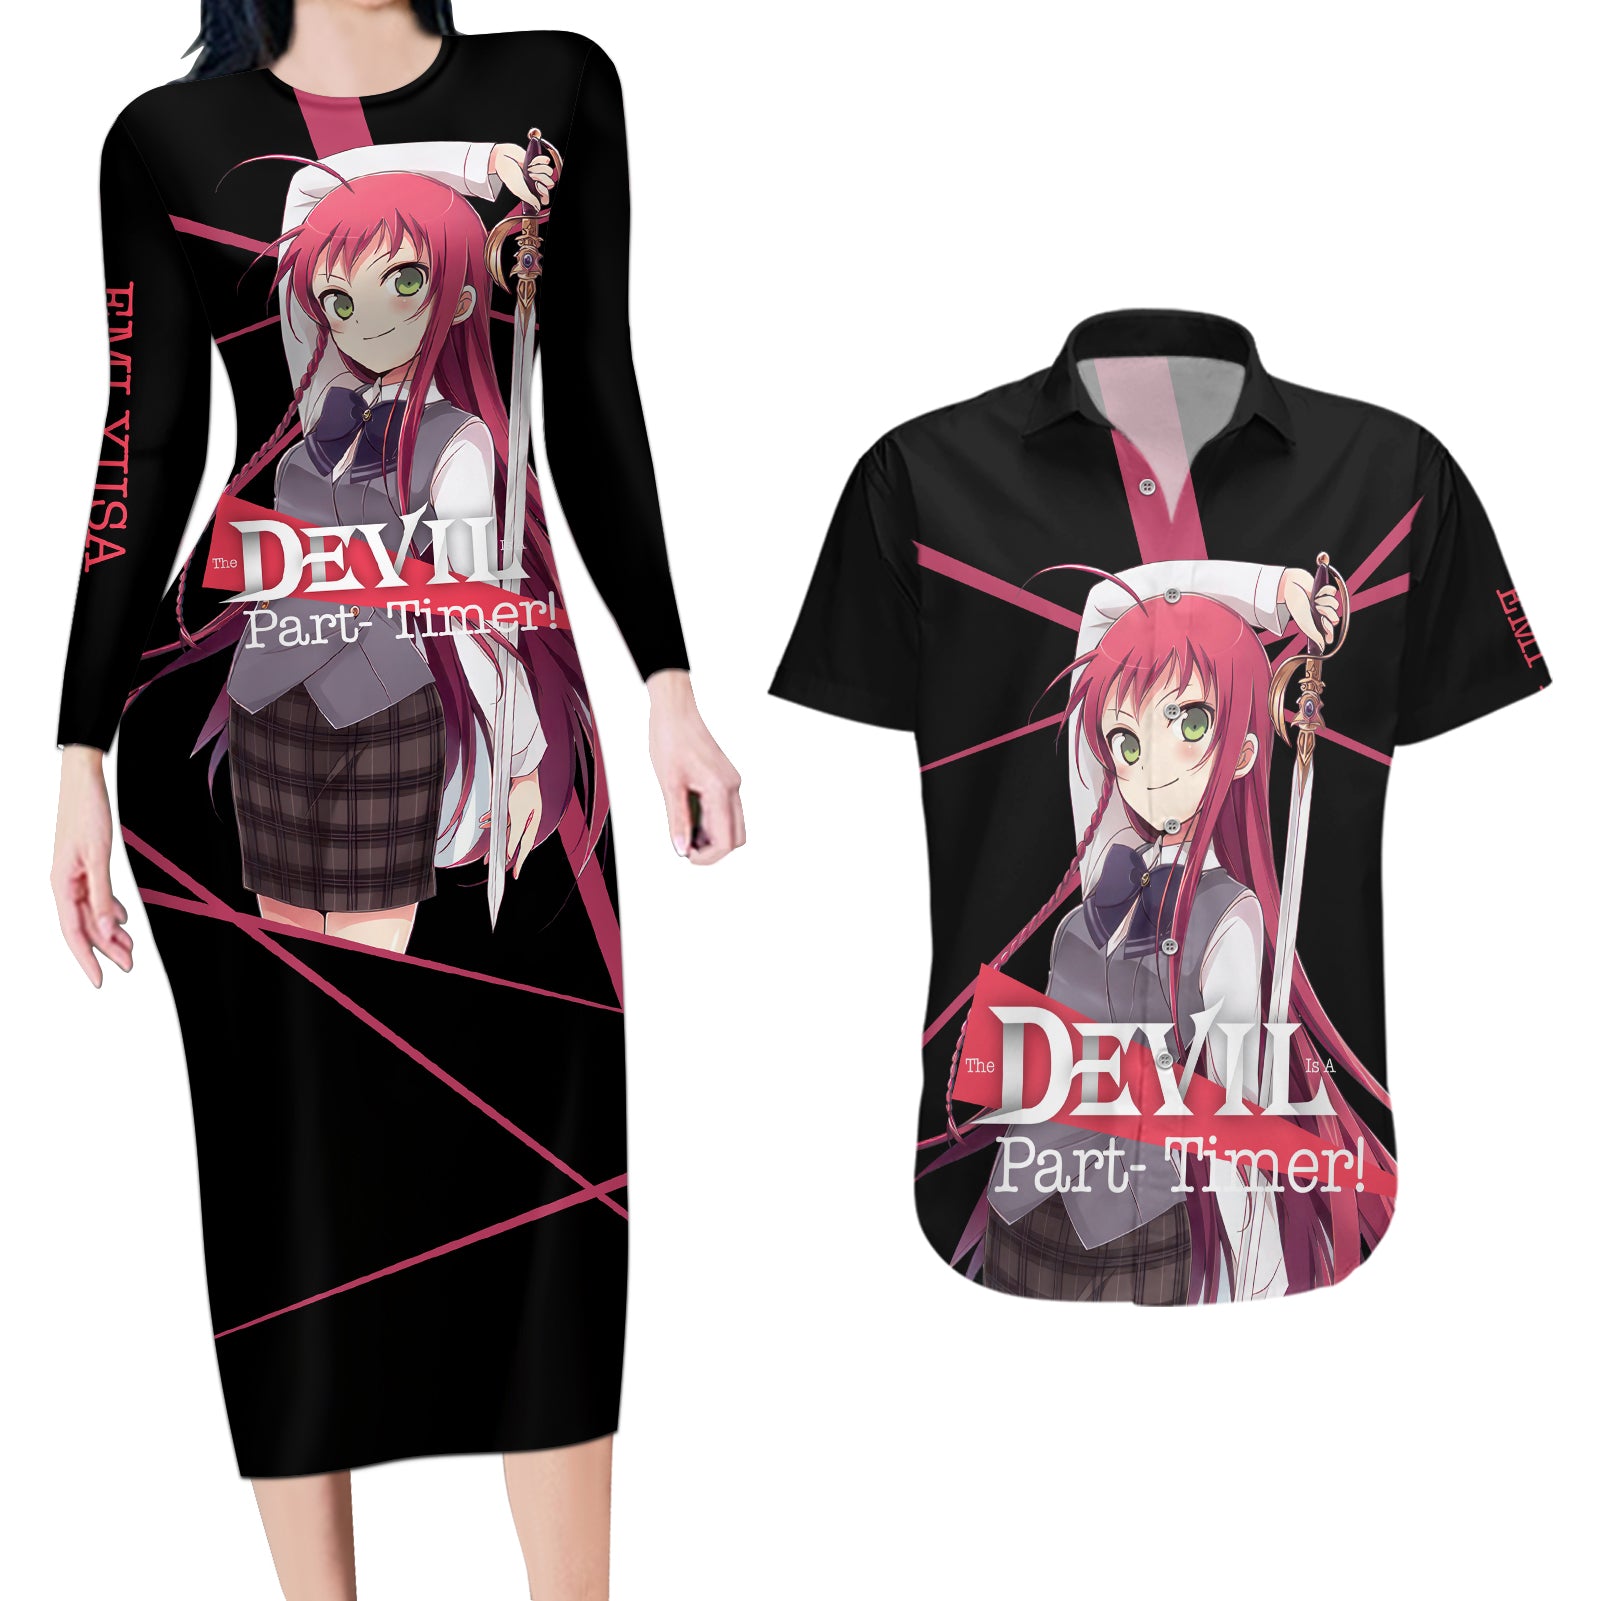 Emi Yusa The Devil Part Timer Couples Matching Long Sleeve Bodycon Dress and Hawaiian Shirt Anime Style